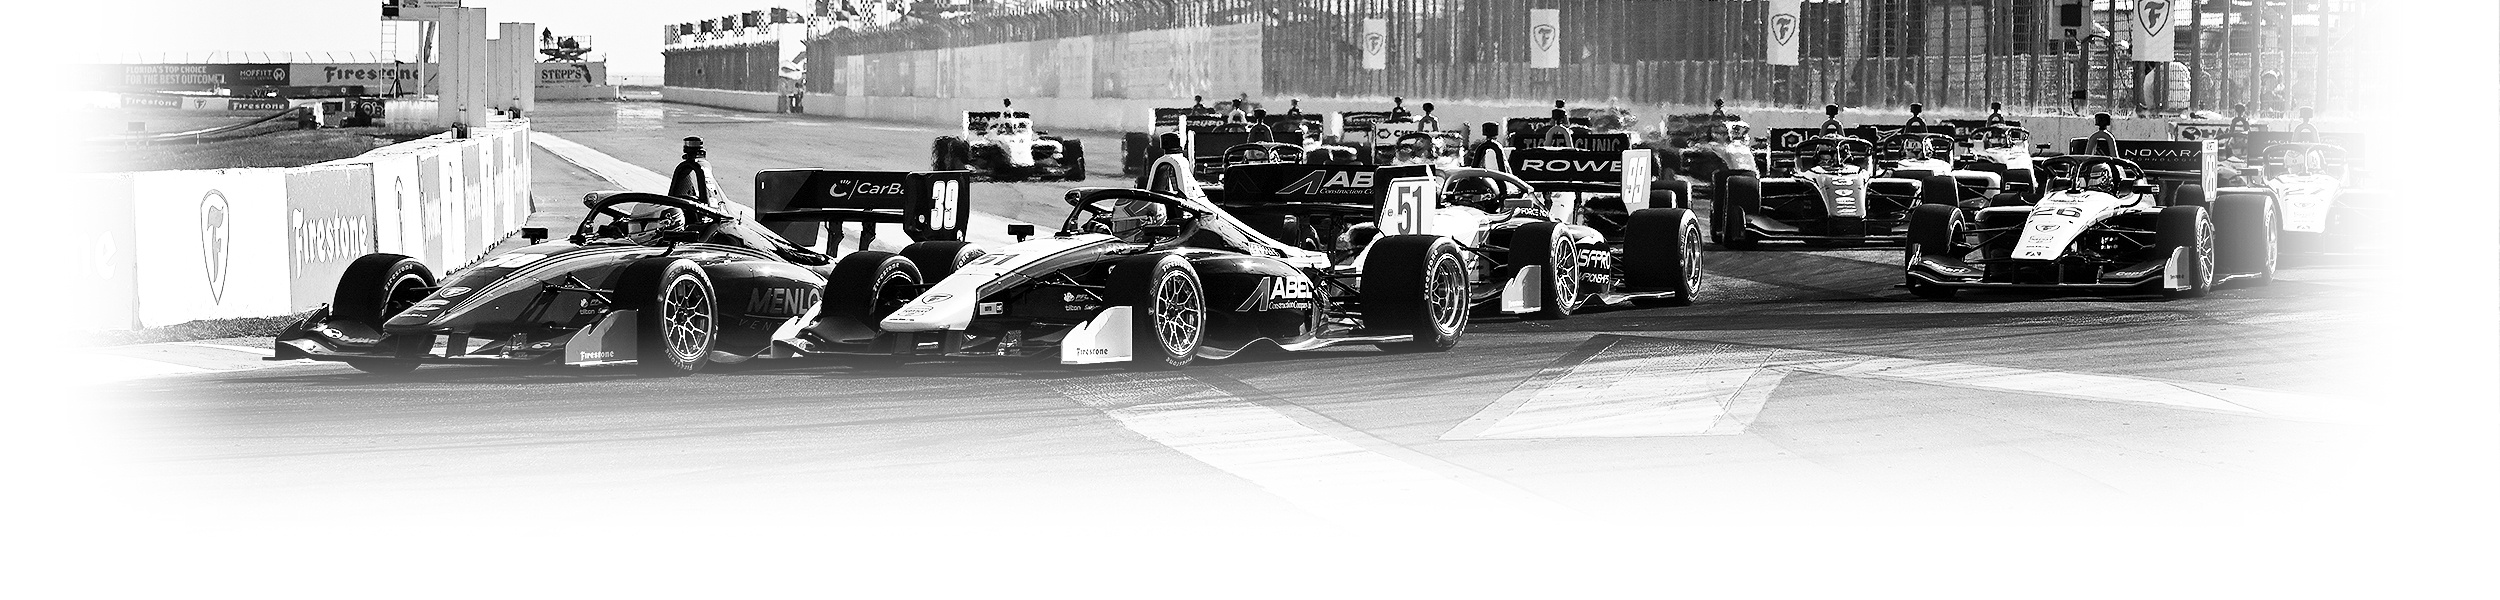 Latest News of the Indy Lights presented by Cooper Tires Series